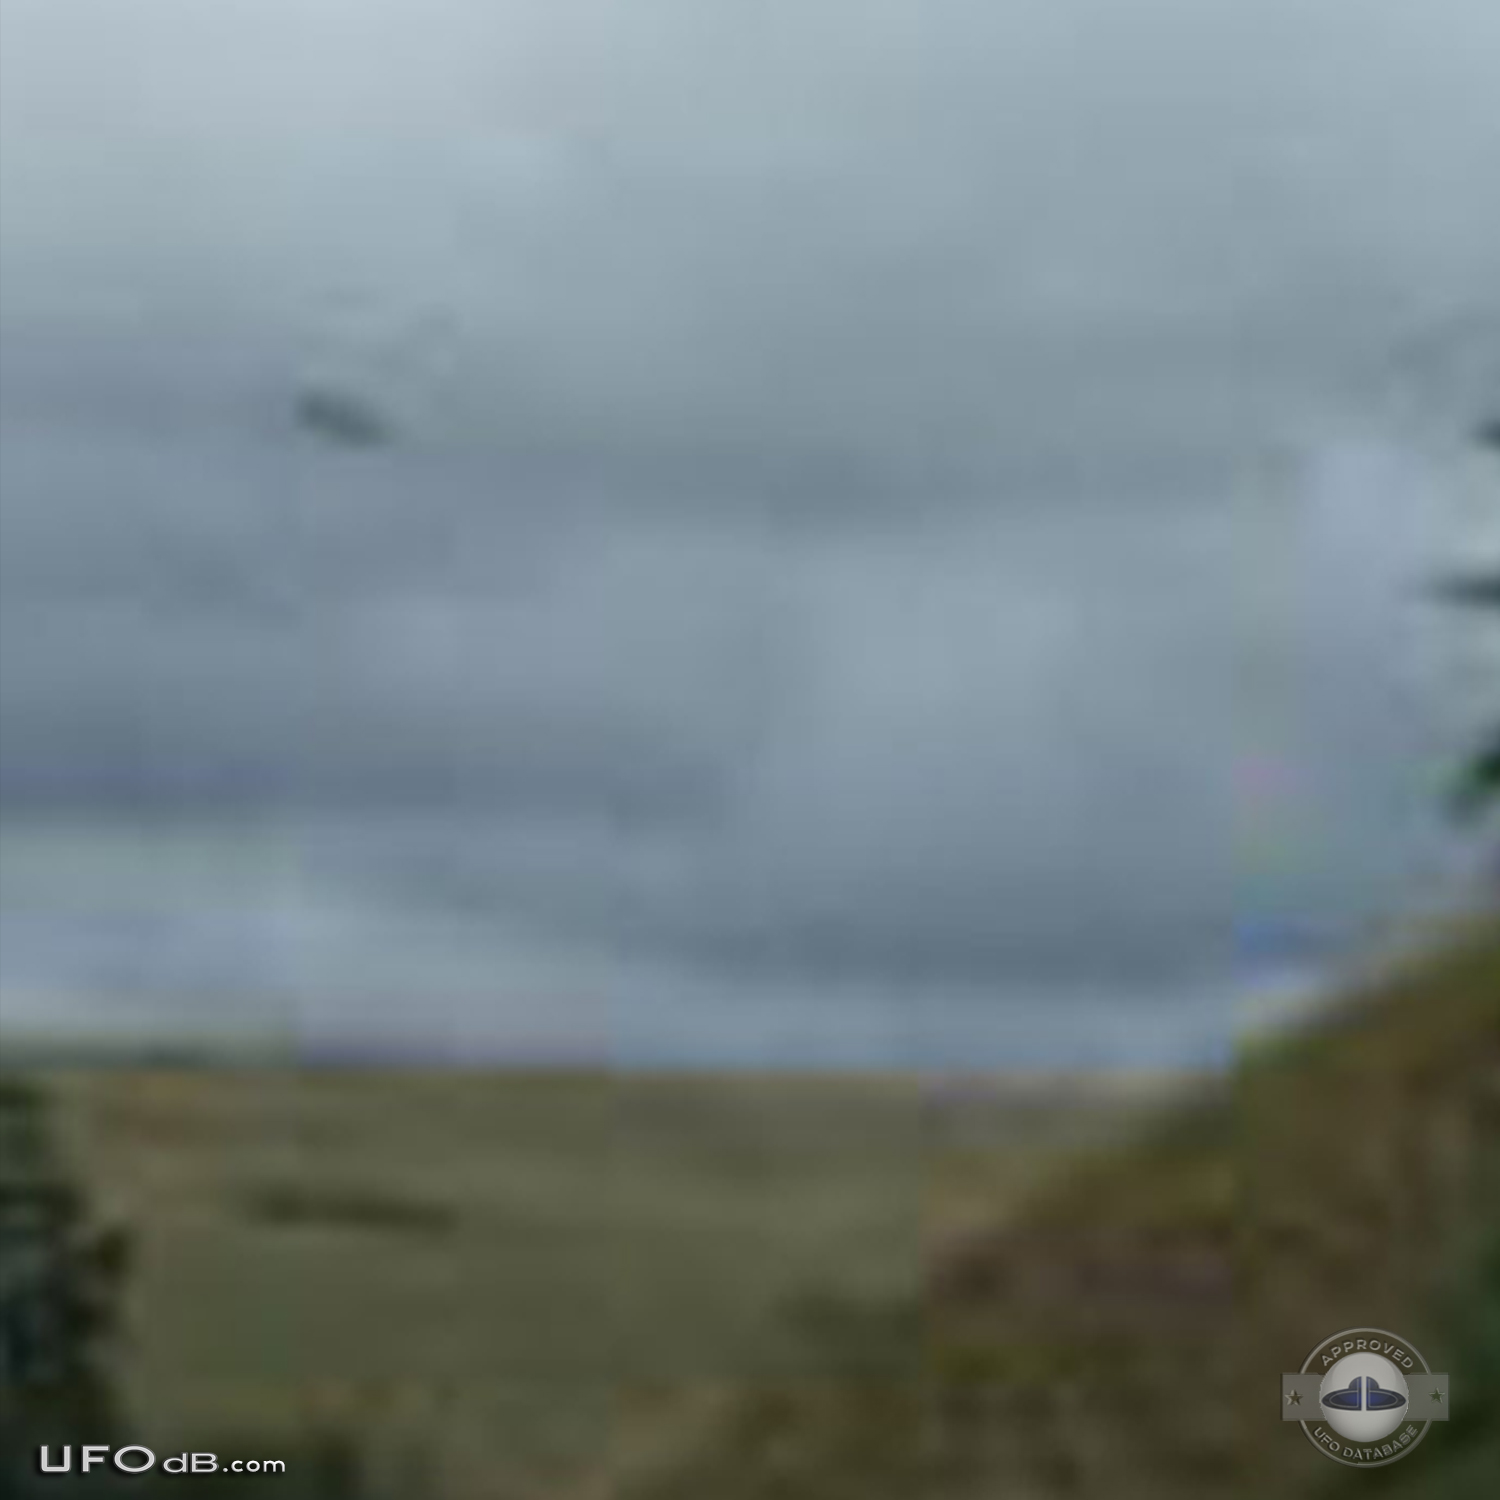 Saucer UFO caught on picture near Silbury Hill in Wiltshire county UK UFO Picture #480-3